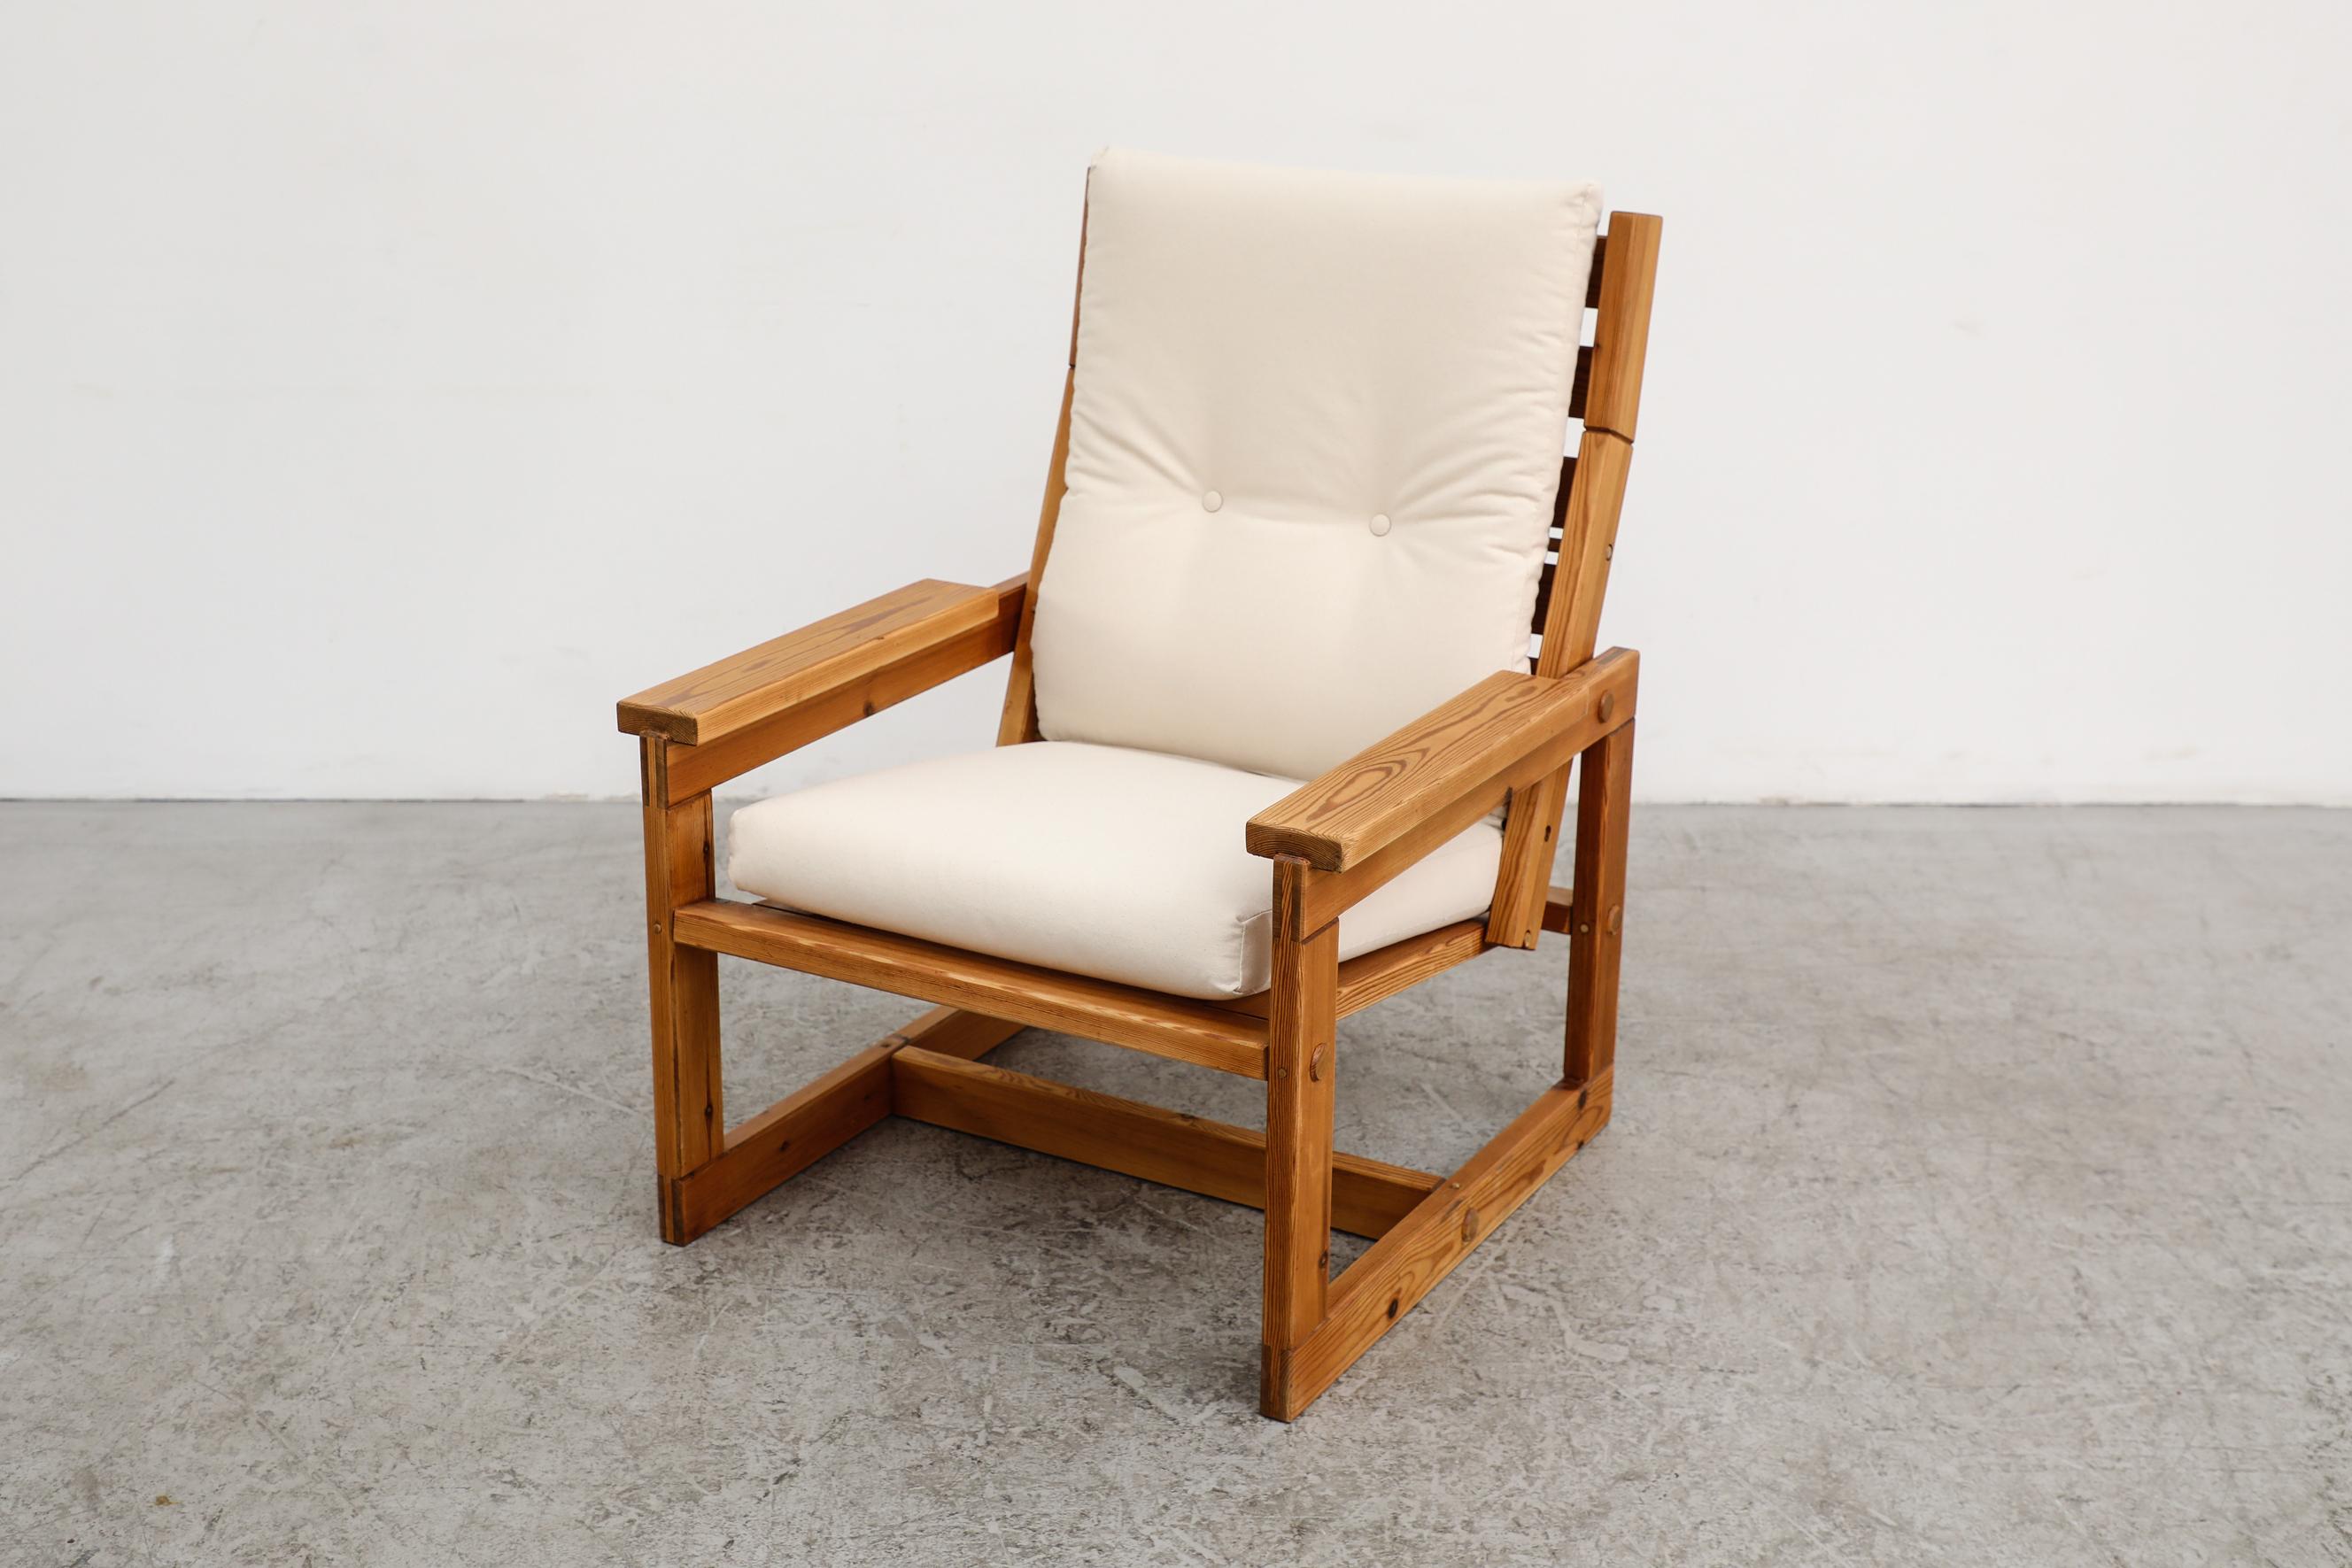 This simple crate style lounge chair in the style of Edvin Helseth whose clean and characterful expression stands as a prime example of Scandinavian design, is made from pine and has new natural canvas upholstered seating that is secured with pine